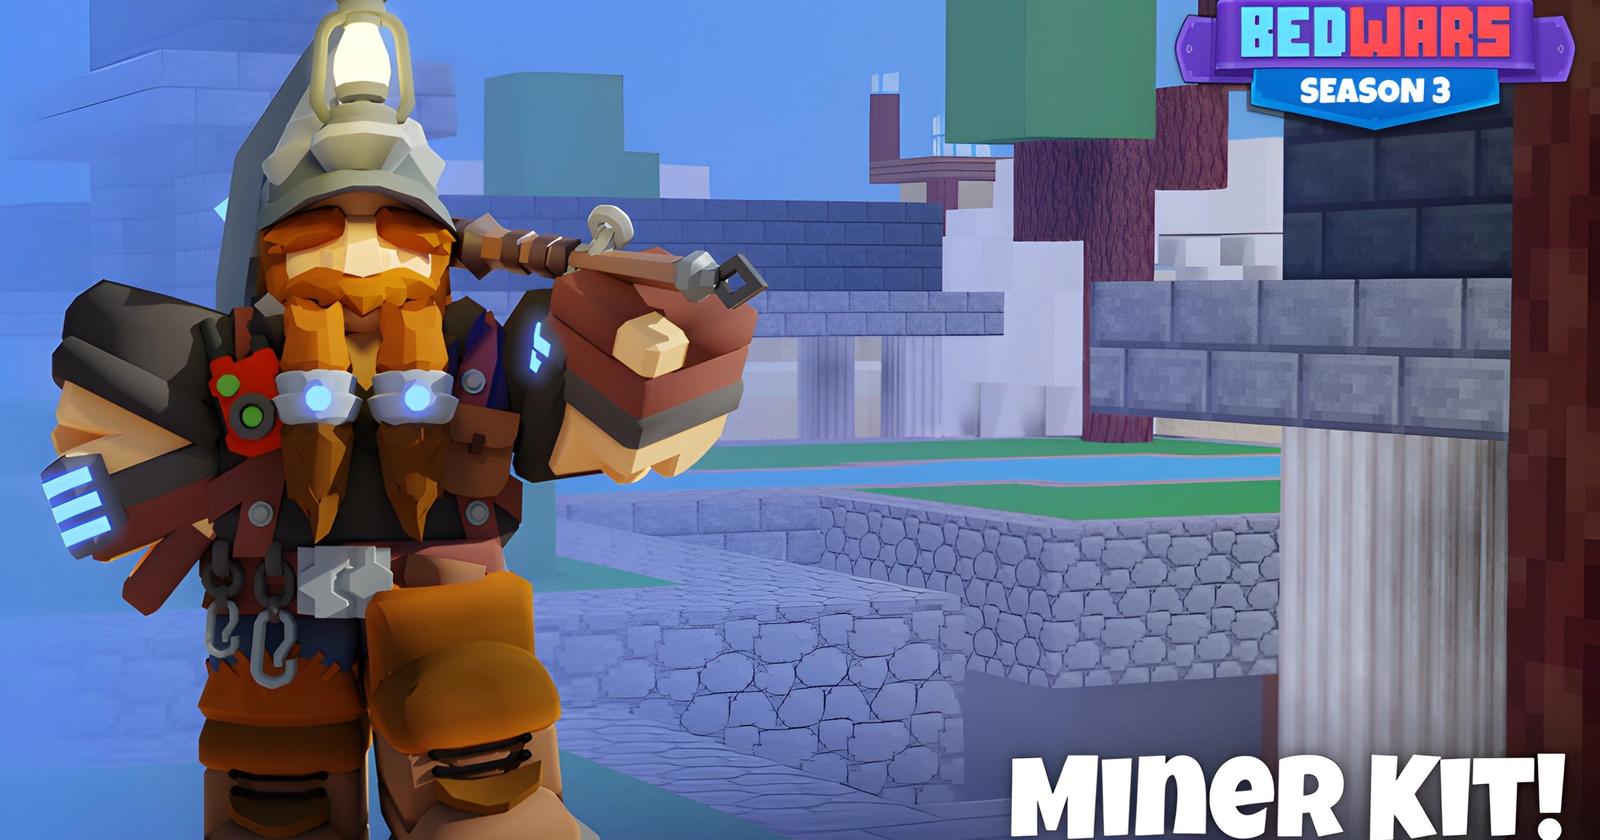 5 reasons why you should play Roblox Bedwars over Minecraft Bedwars